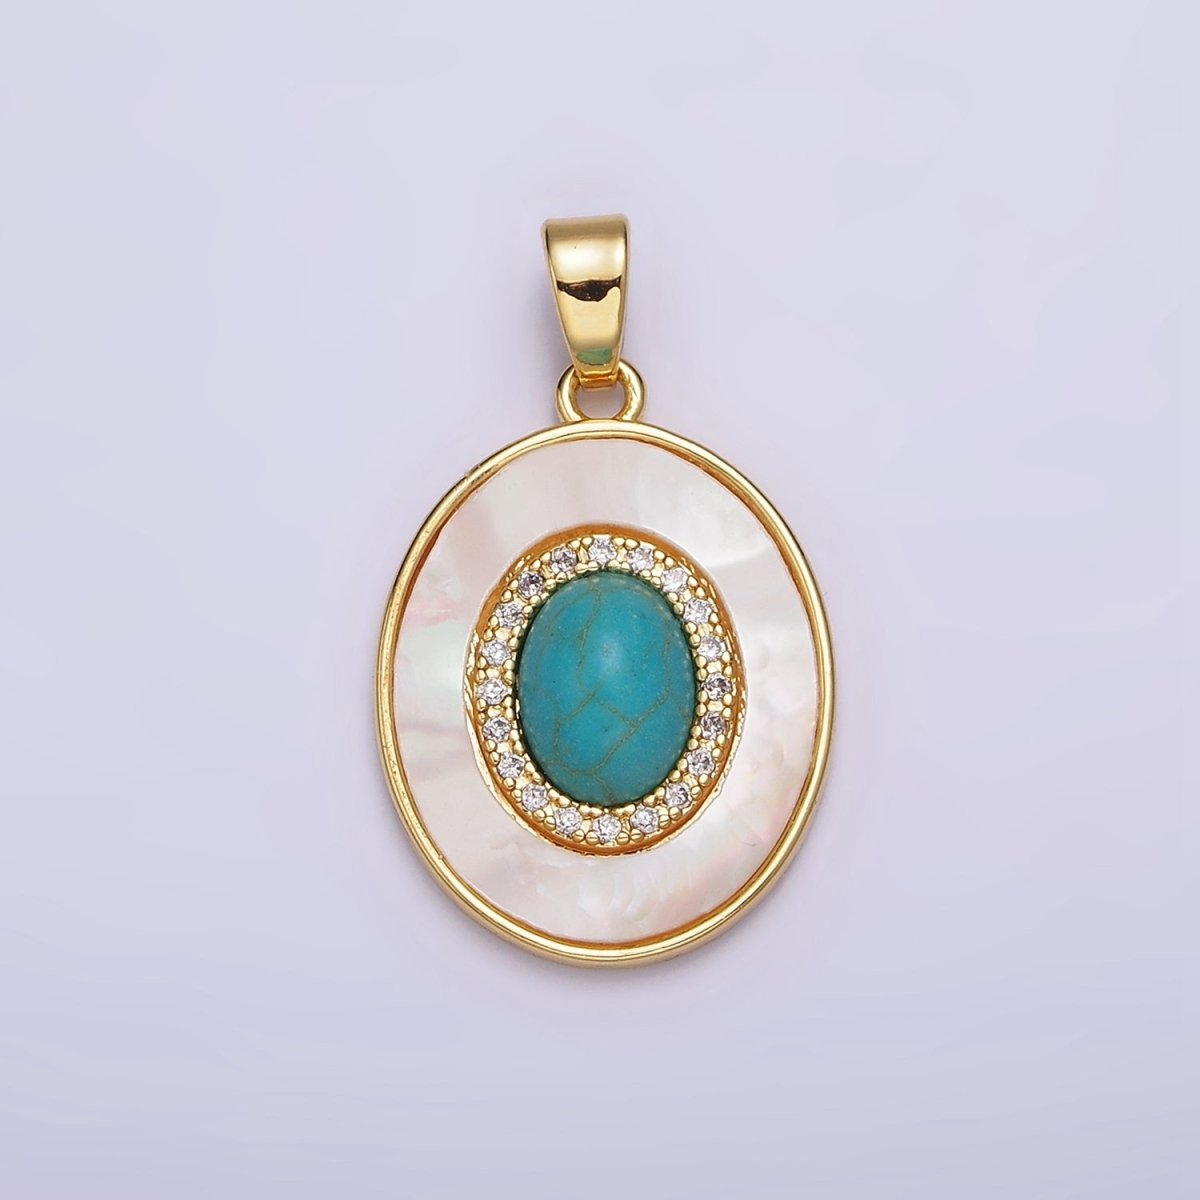 24K Gold Filled Turquoise, Pearl, Abalone Micro Paved CZ Shell Pearl, Abalone Pendant | AA595 - AA597 - DLUXCA